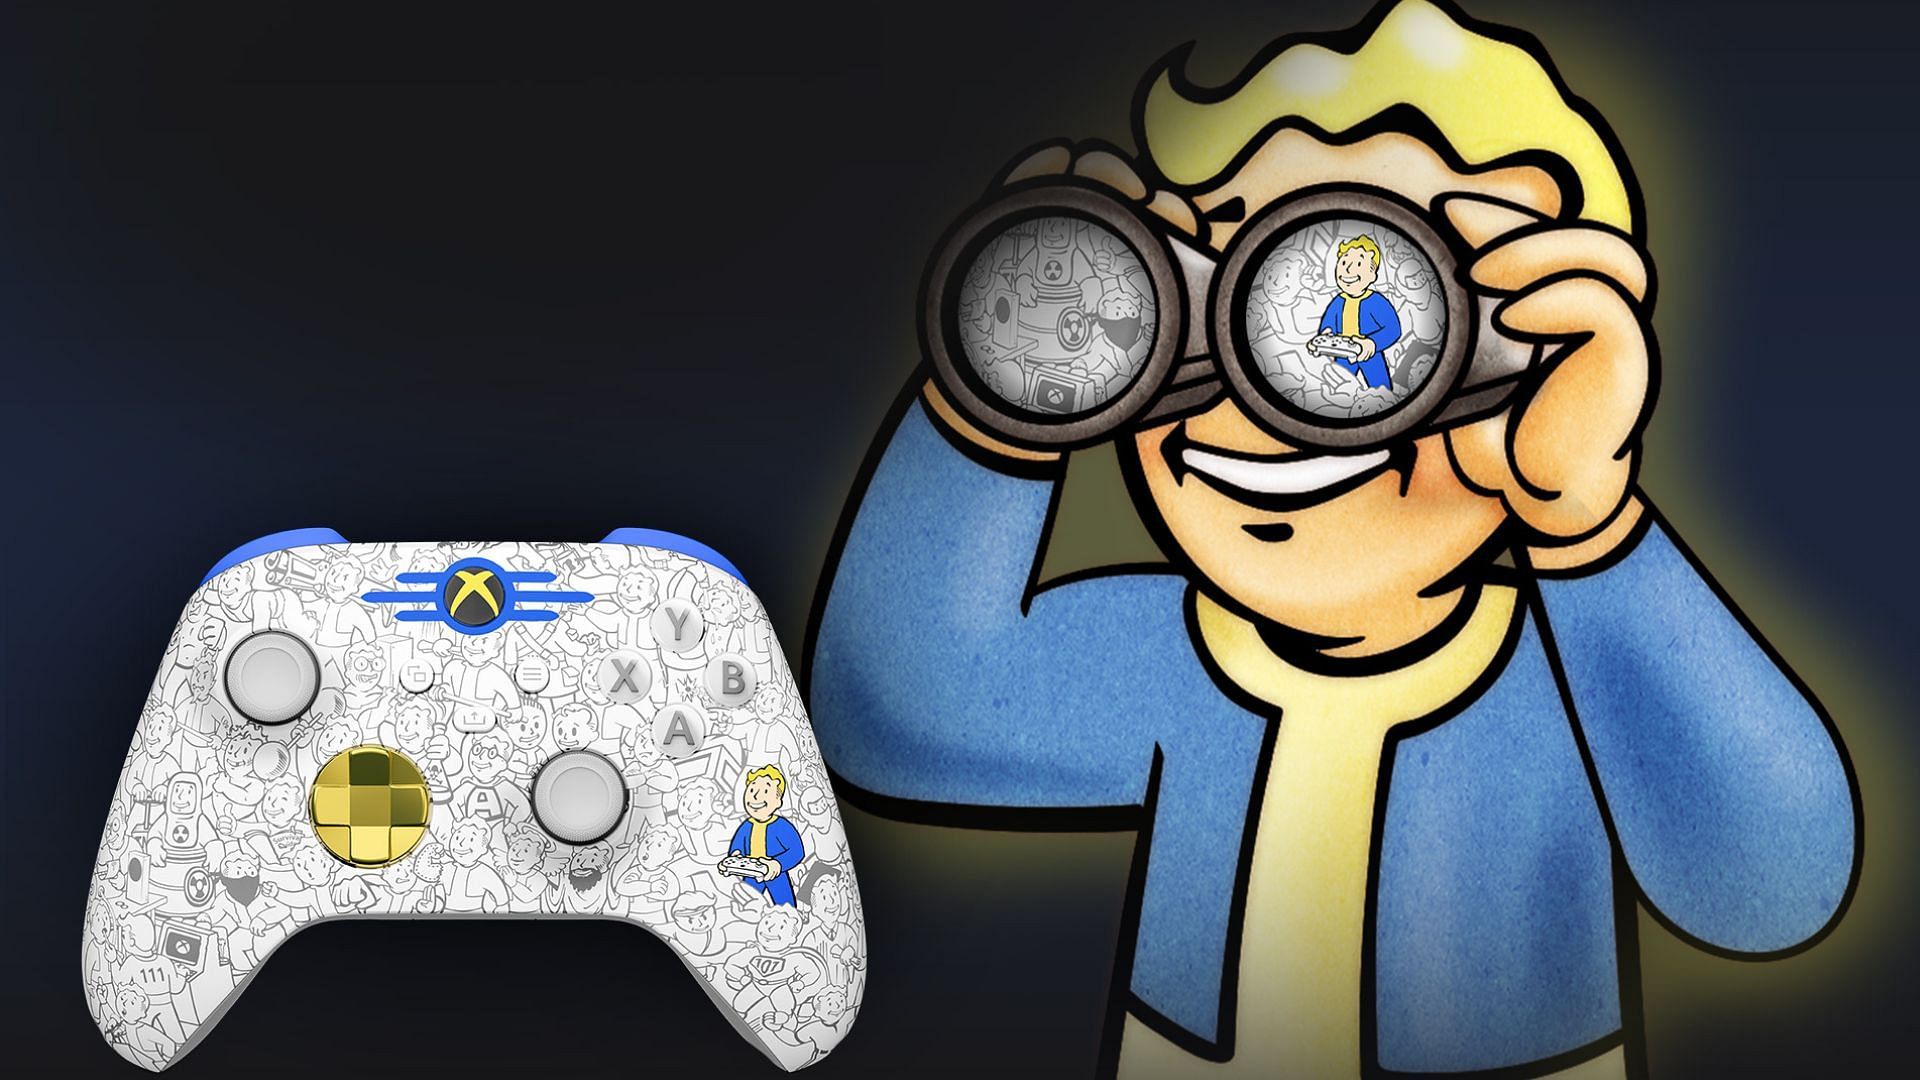 Image of the vault dweller looking at a fallout themed controller through a pair of binoculars